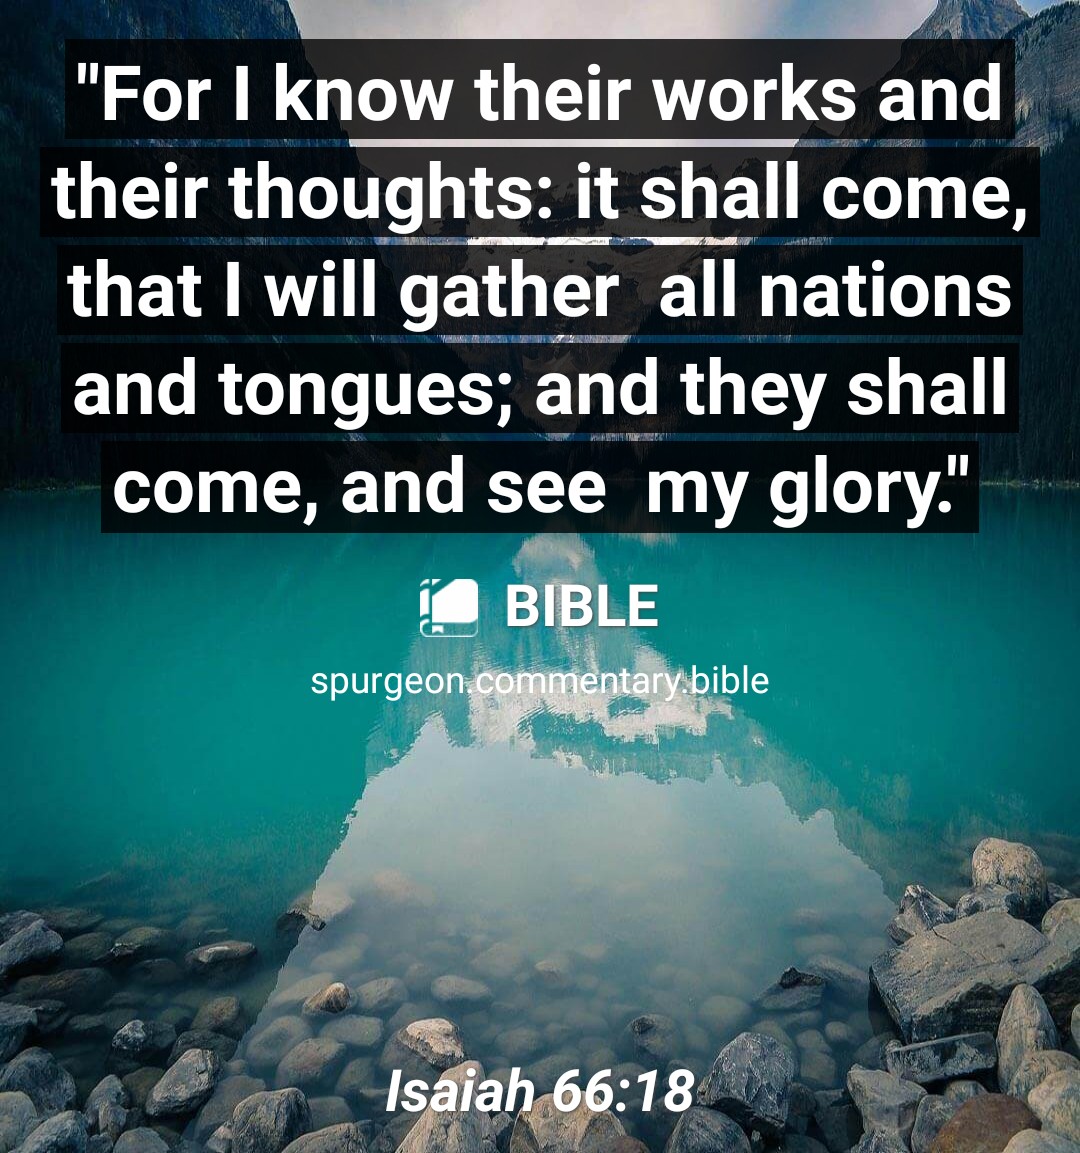 🙏🙏🙏 ✝ Isaiah 66:18 'For I know their works and their thoughts: it shall come, that I will gather all nations and tongues; and they shall come, and see my glory.' play.google.com/store/apps/det…